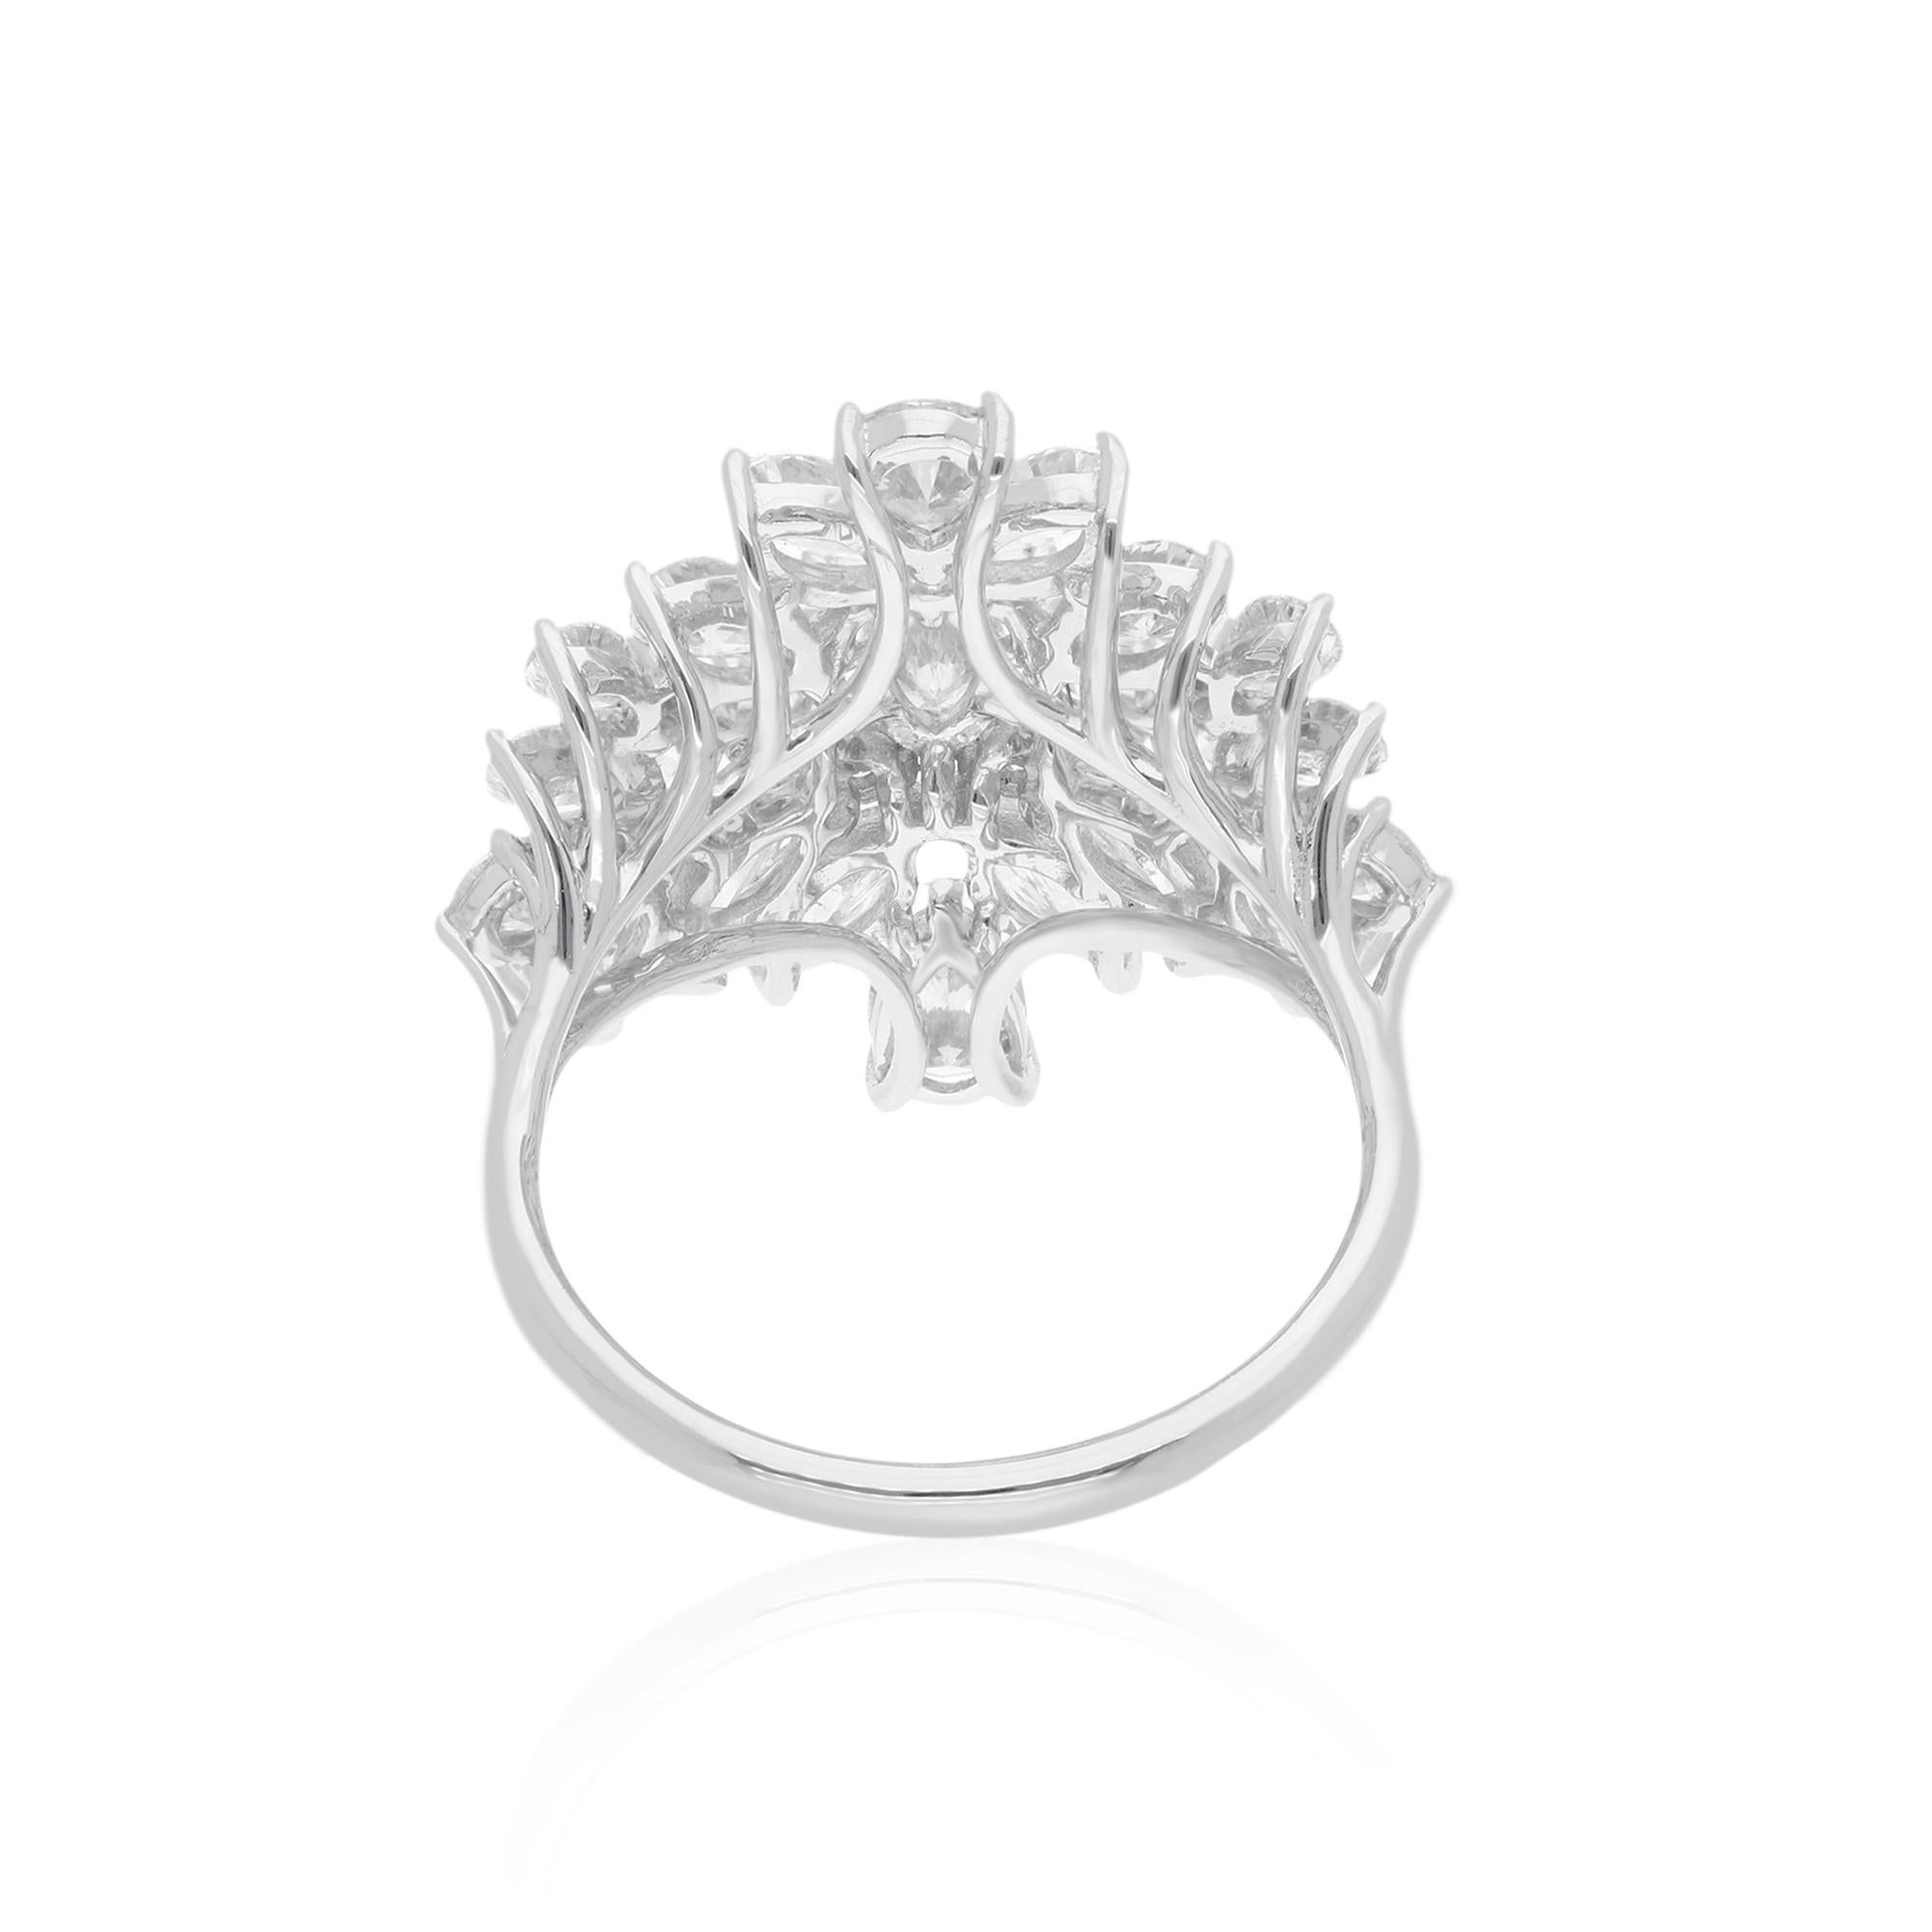 Modern 3.32 Carat Marquise & Pear Diamond Cocktail Ring 14 Karat White Gold Jewelry For Sale